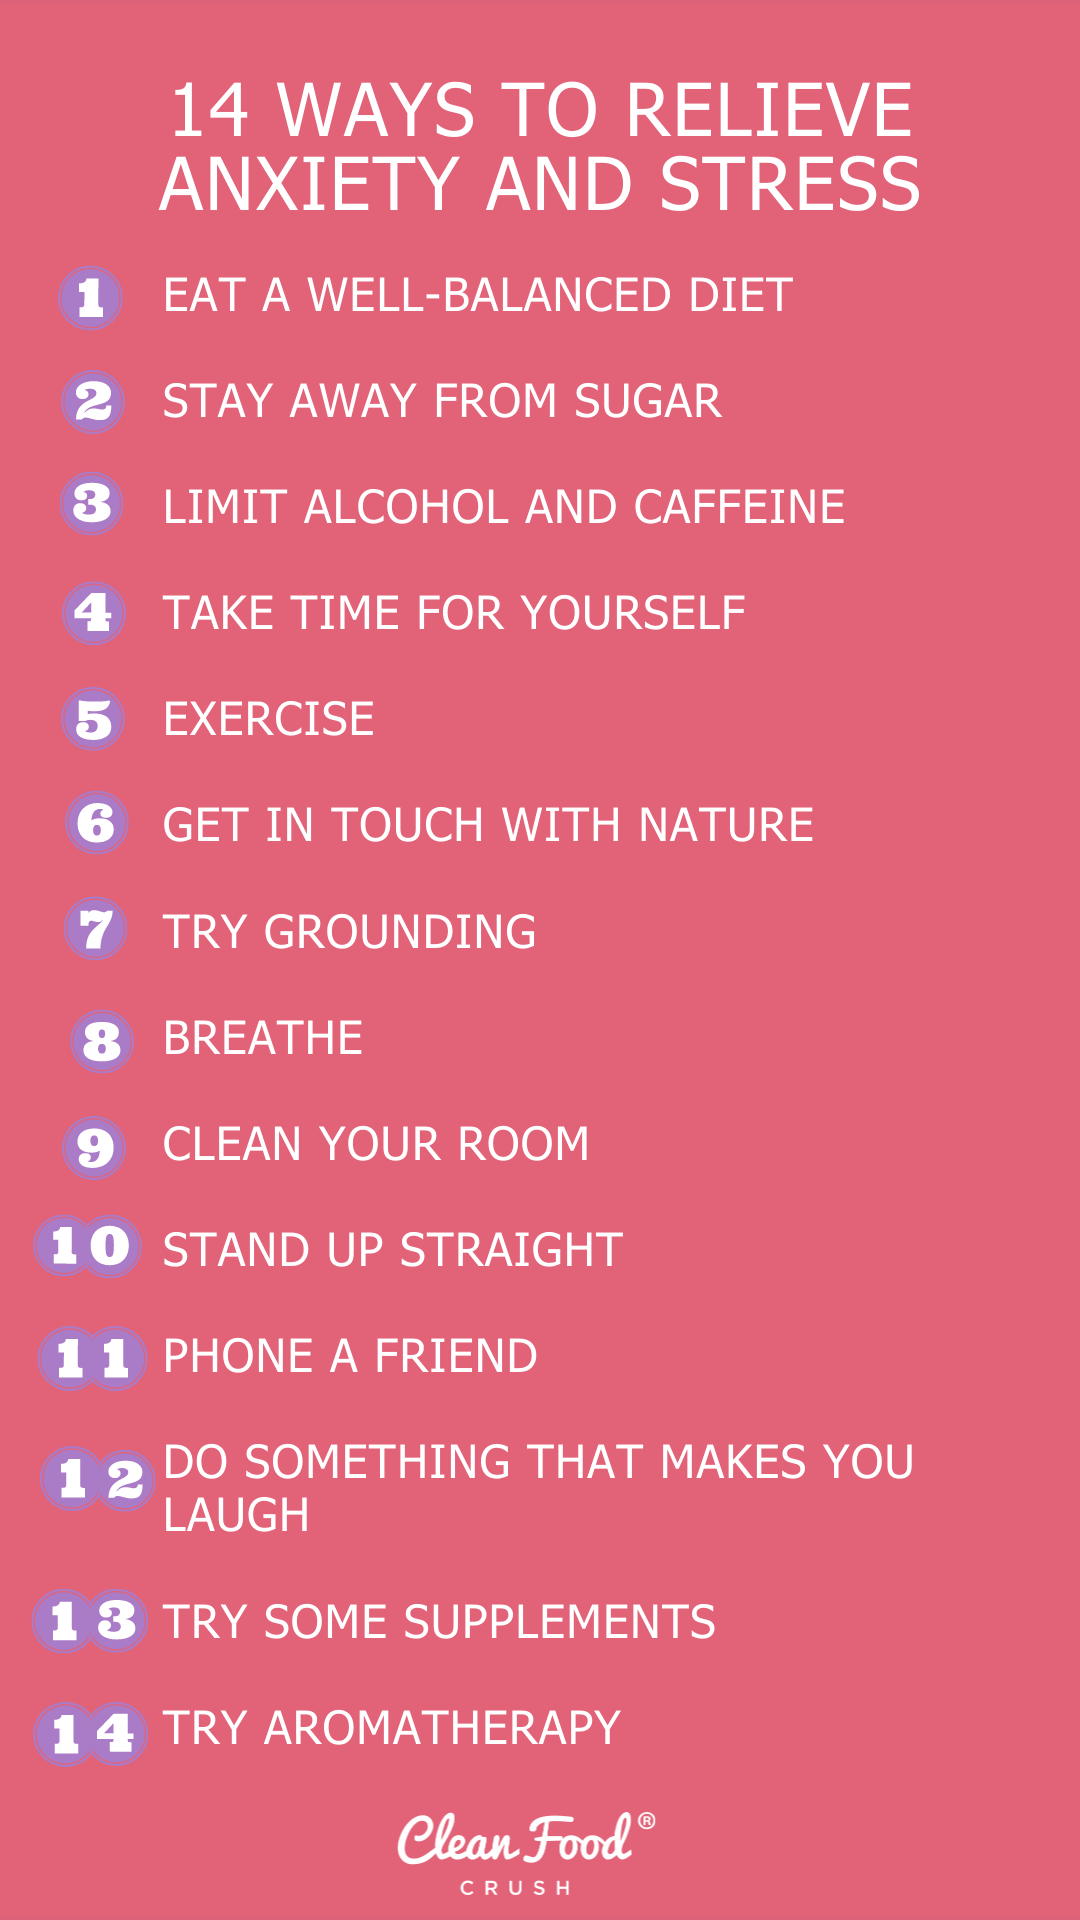 14 Ways to Relieve Anxiety and Stress